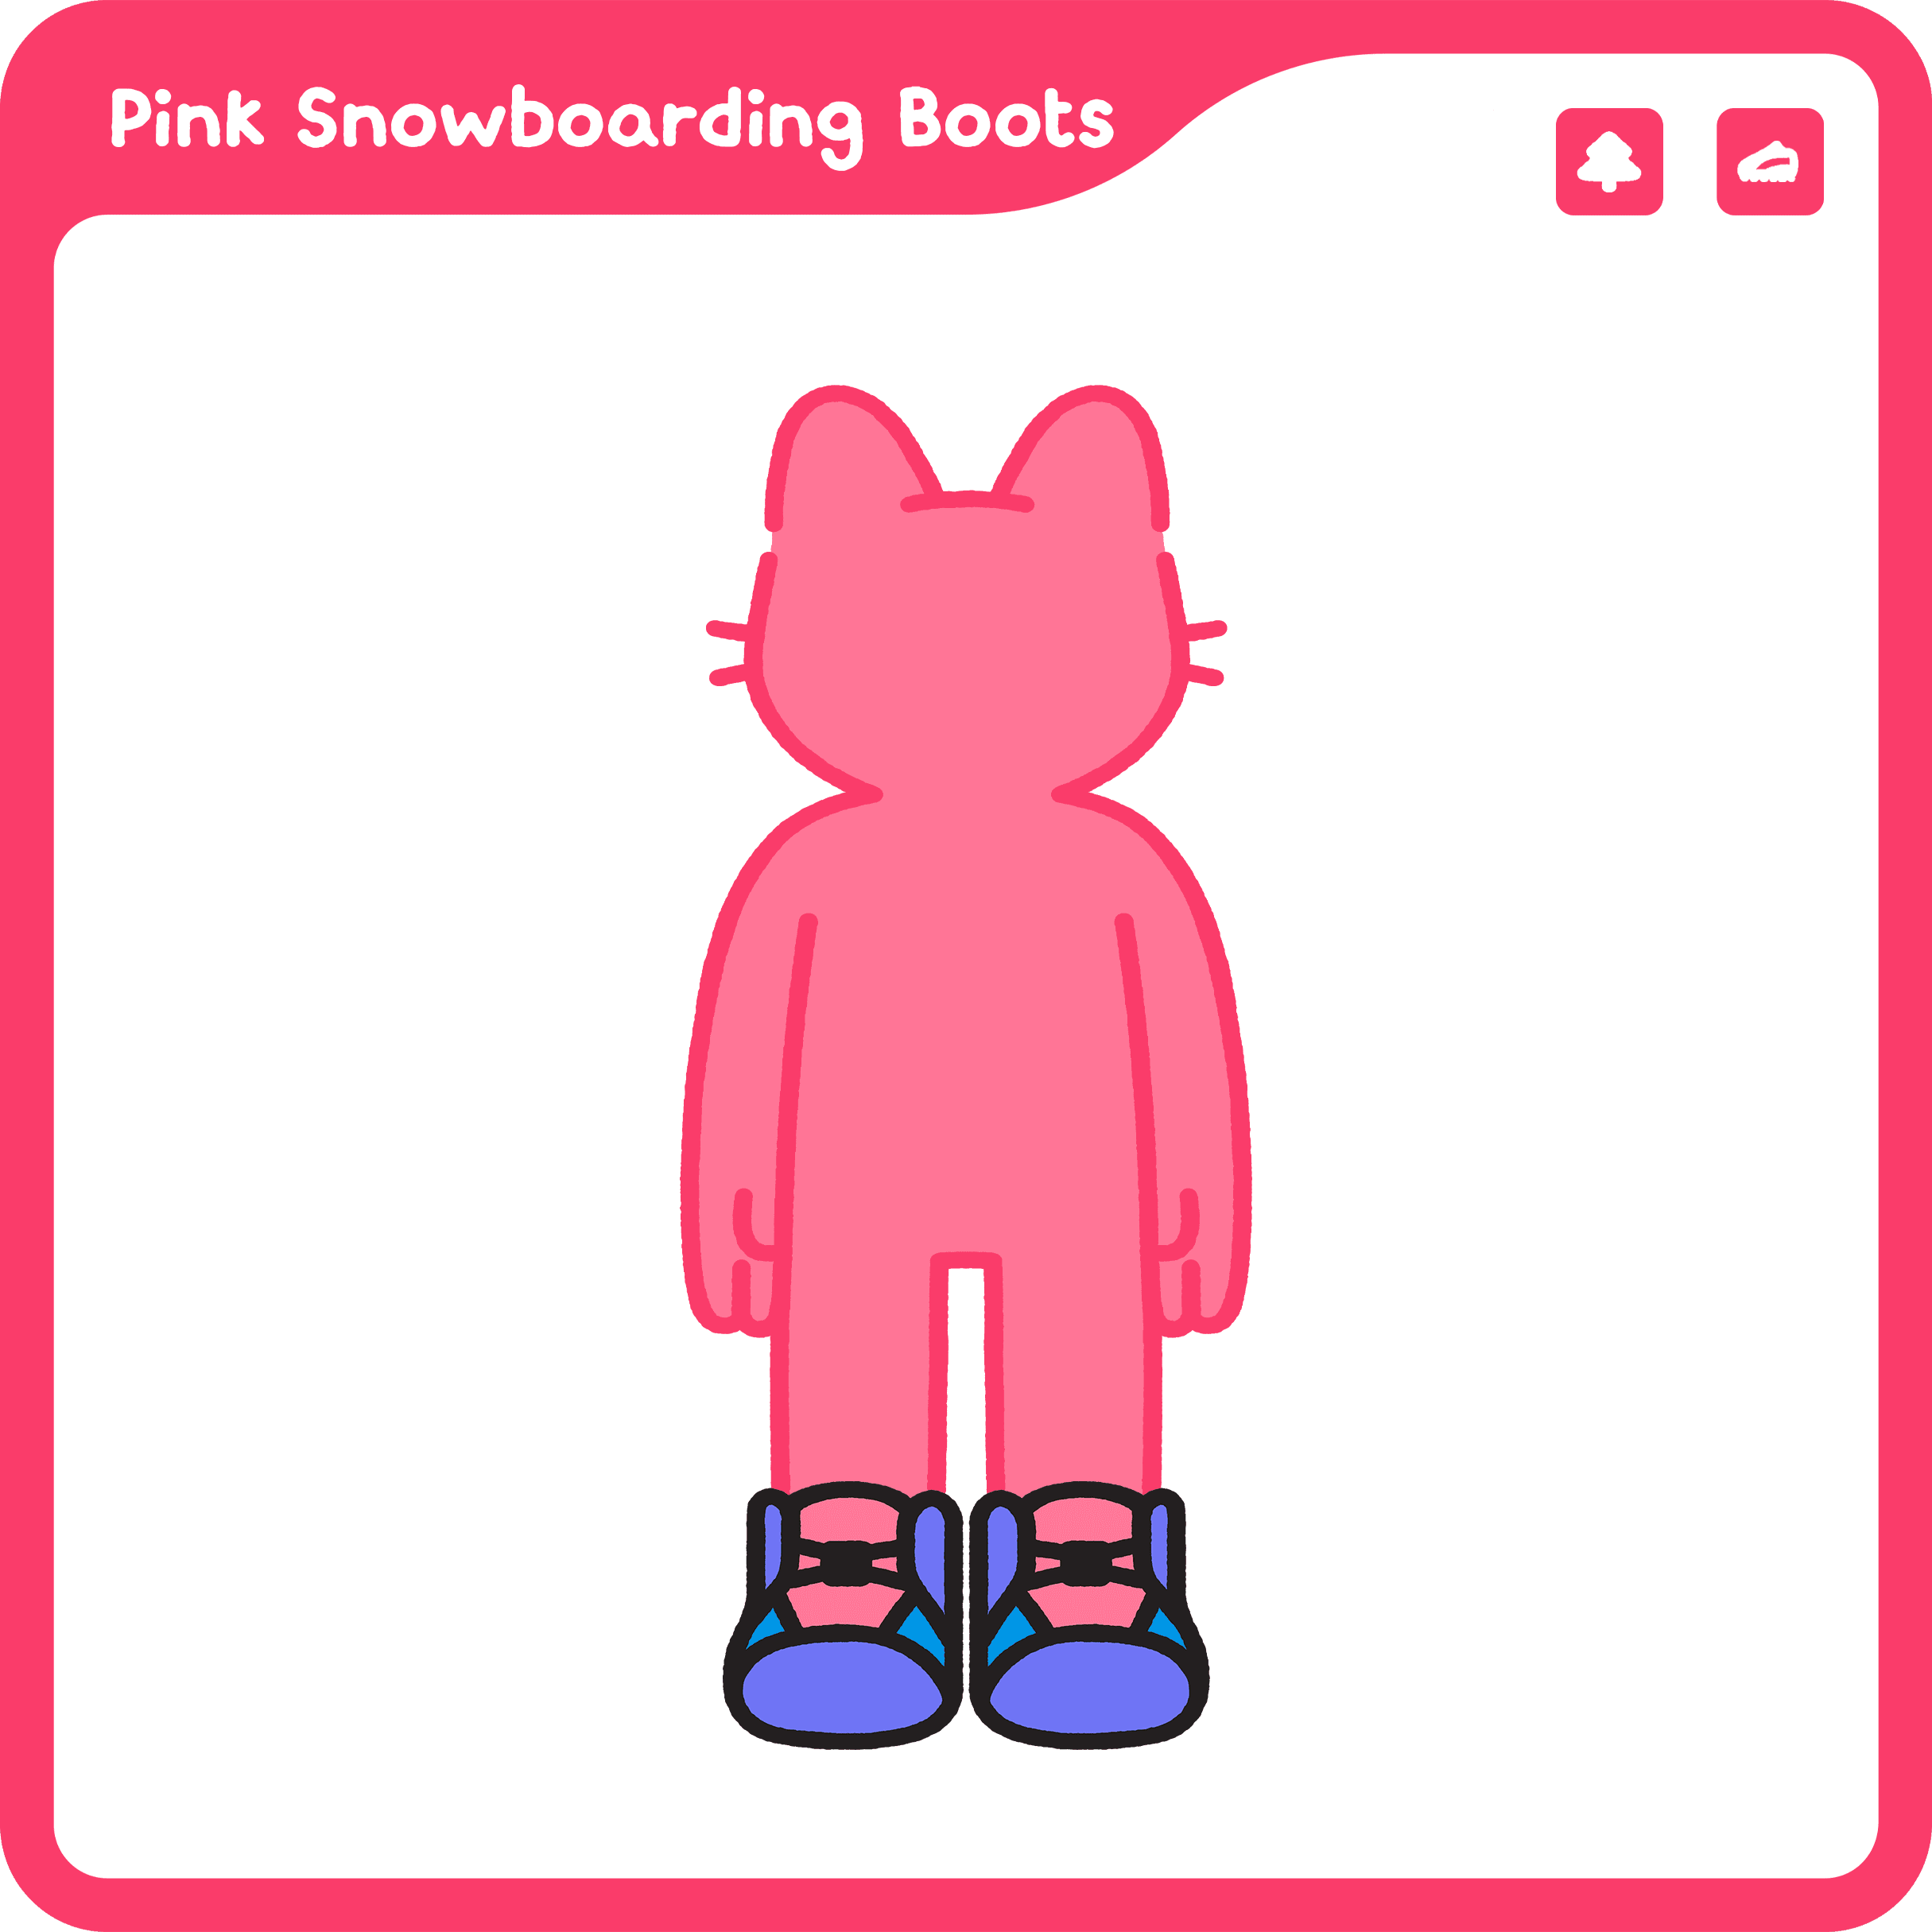 Pink Snowboarding Boots